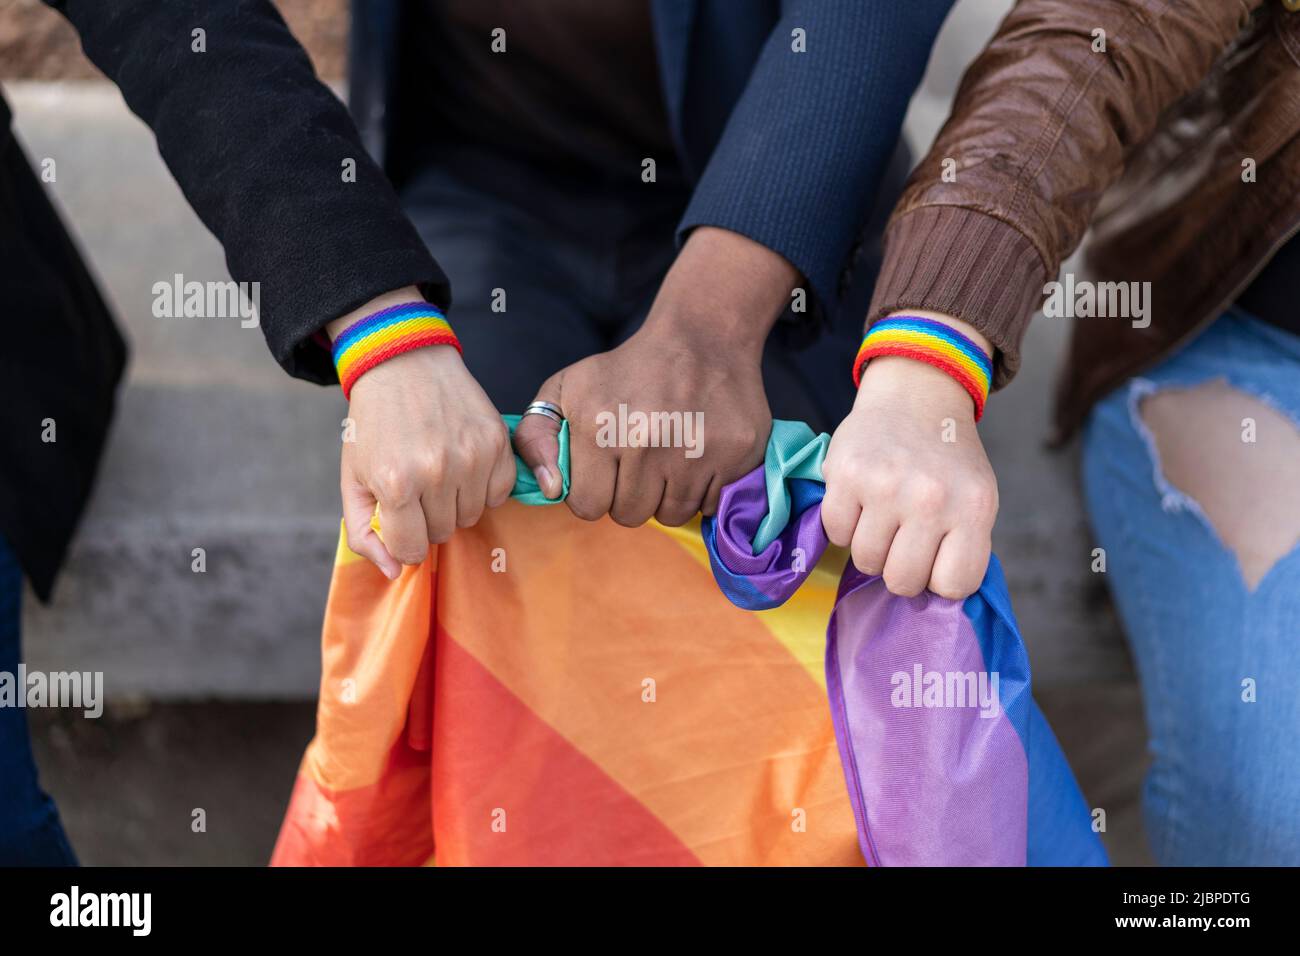 Multi ethnic lgbt gruup wearing lgbt wristbands, holding lgbt flag. Stock Photo